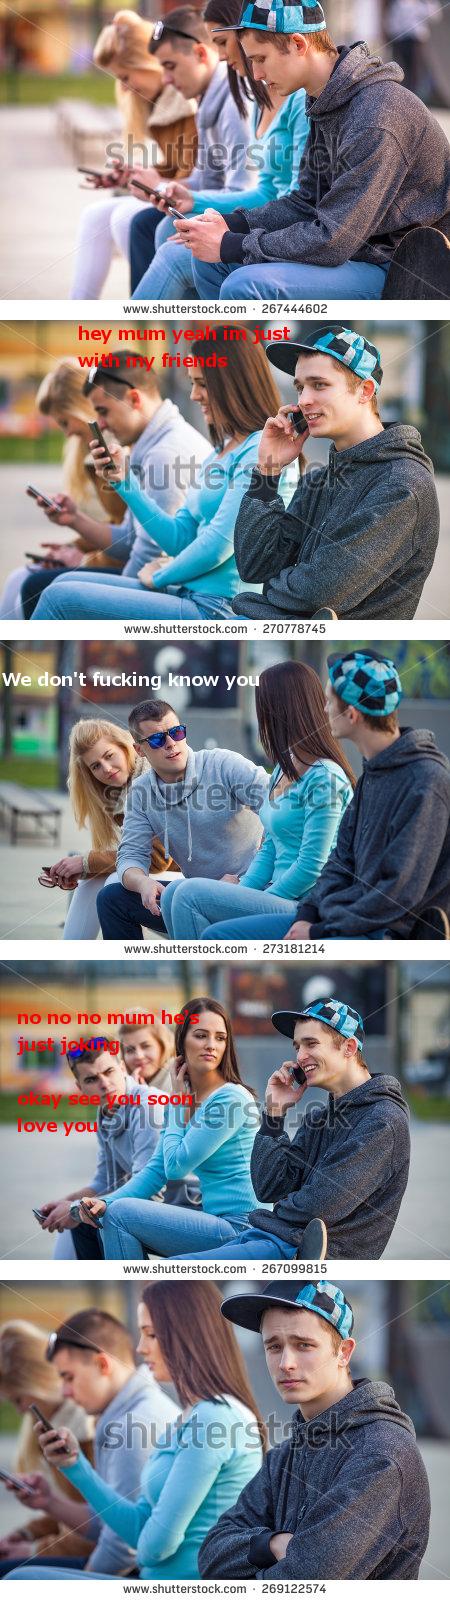 shutterstock funny caption - . 267444602 hey mum yeh in ust with ny friends Shutterst . 270778745 We don't fucking know you ang tekstcl . 273181214 no no no mum hes jual jok ngja ay see you soon! love you shutters . 267099815 e shutterst . 269122574